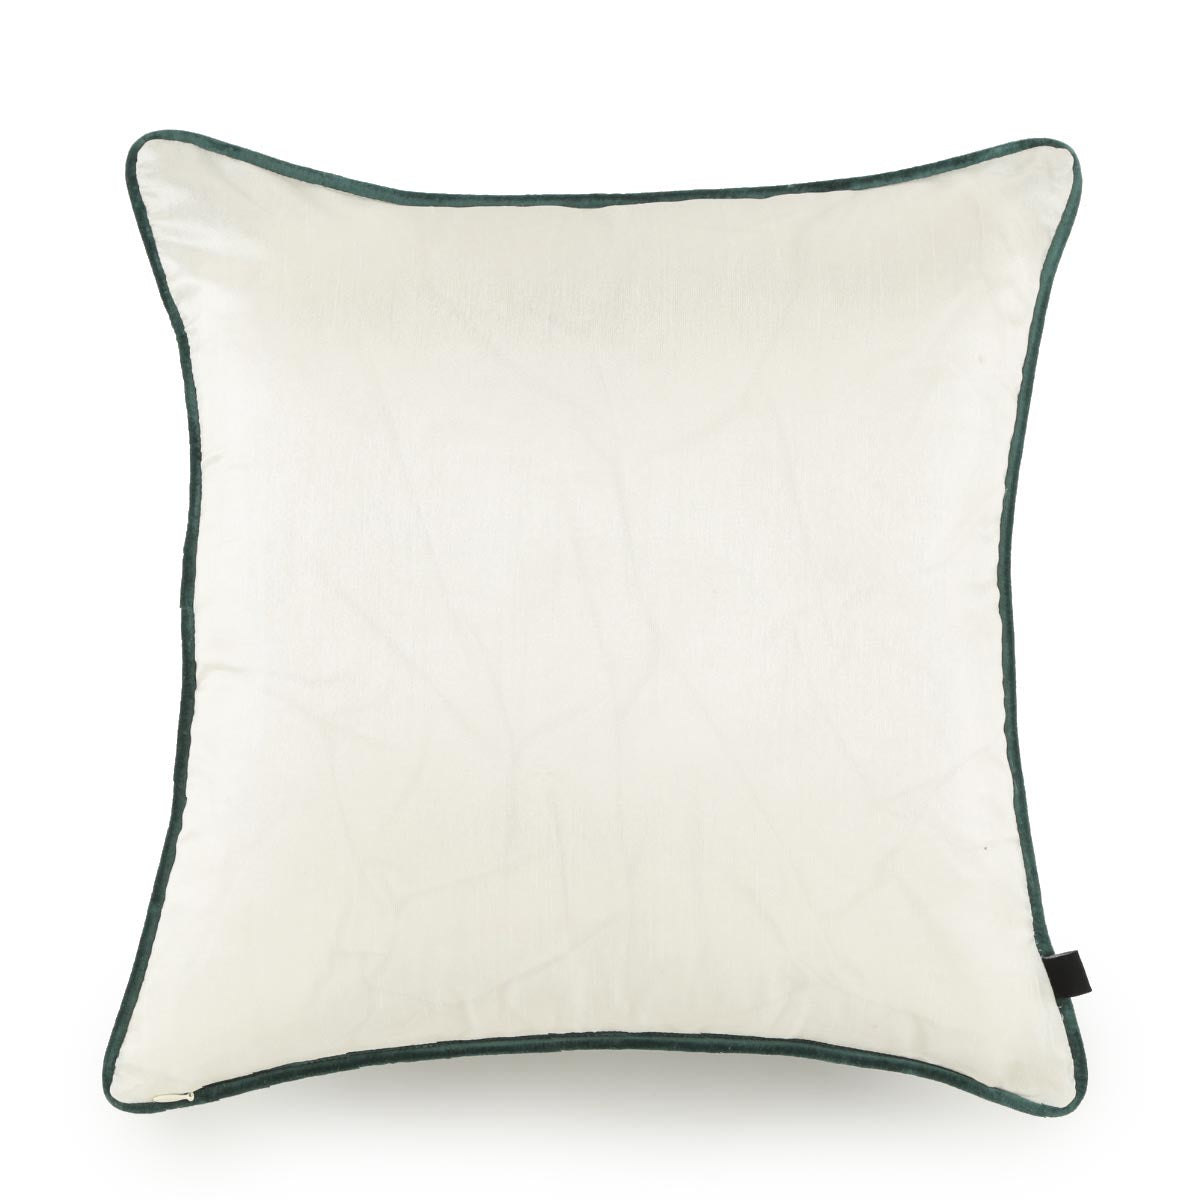 Renly Cushion Cover